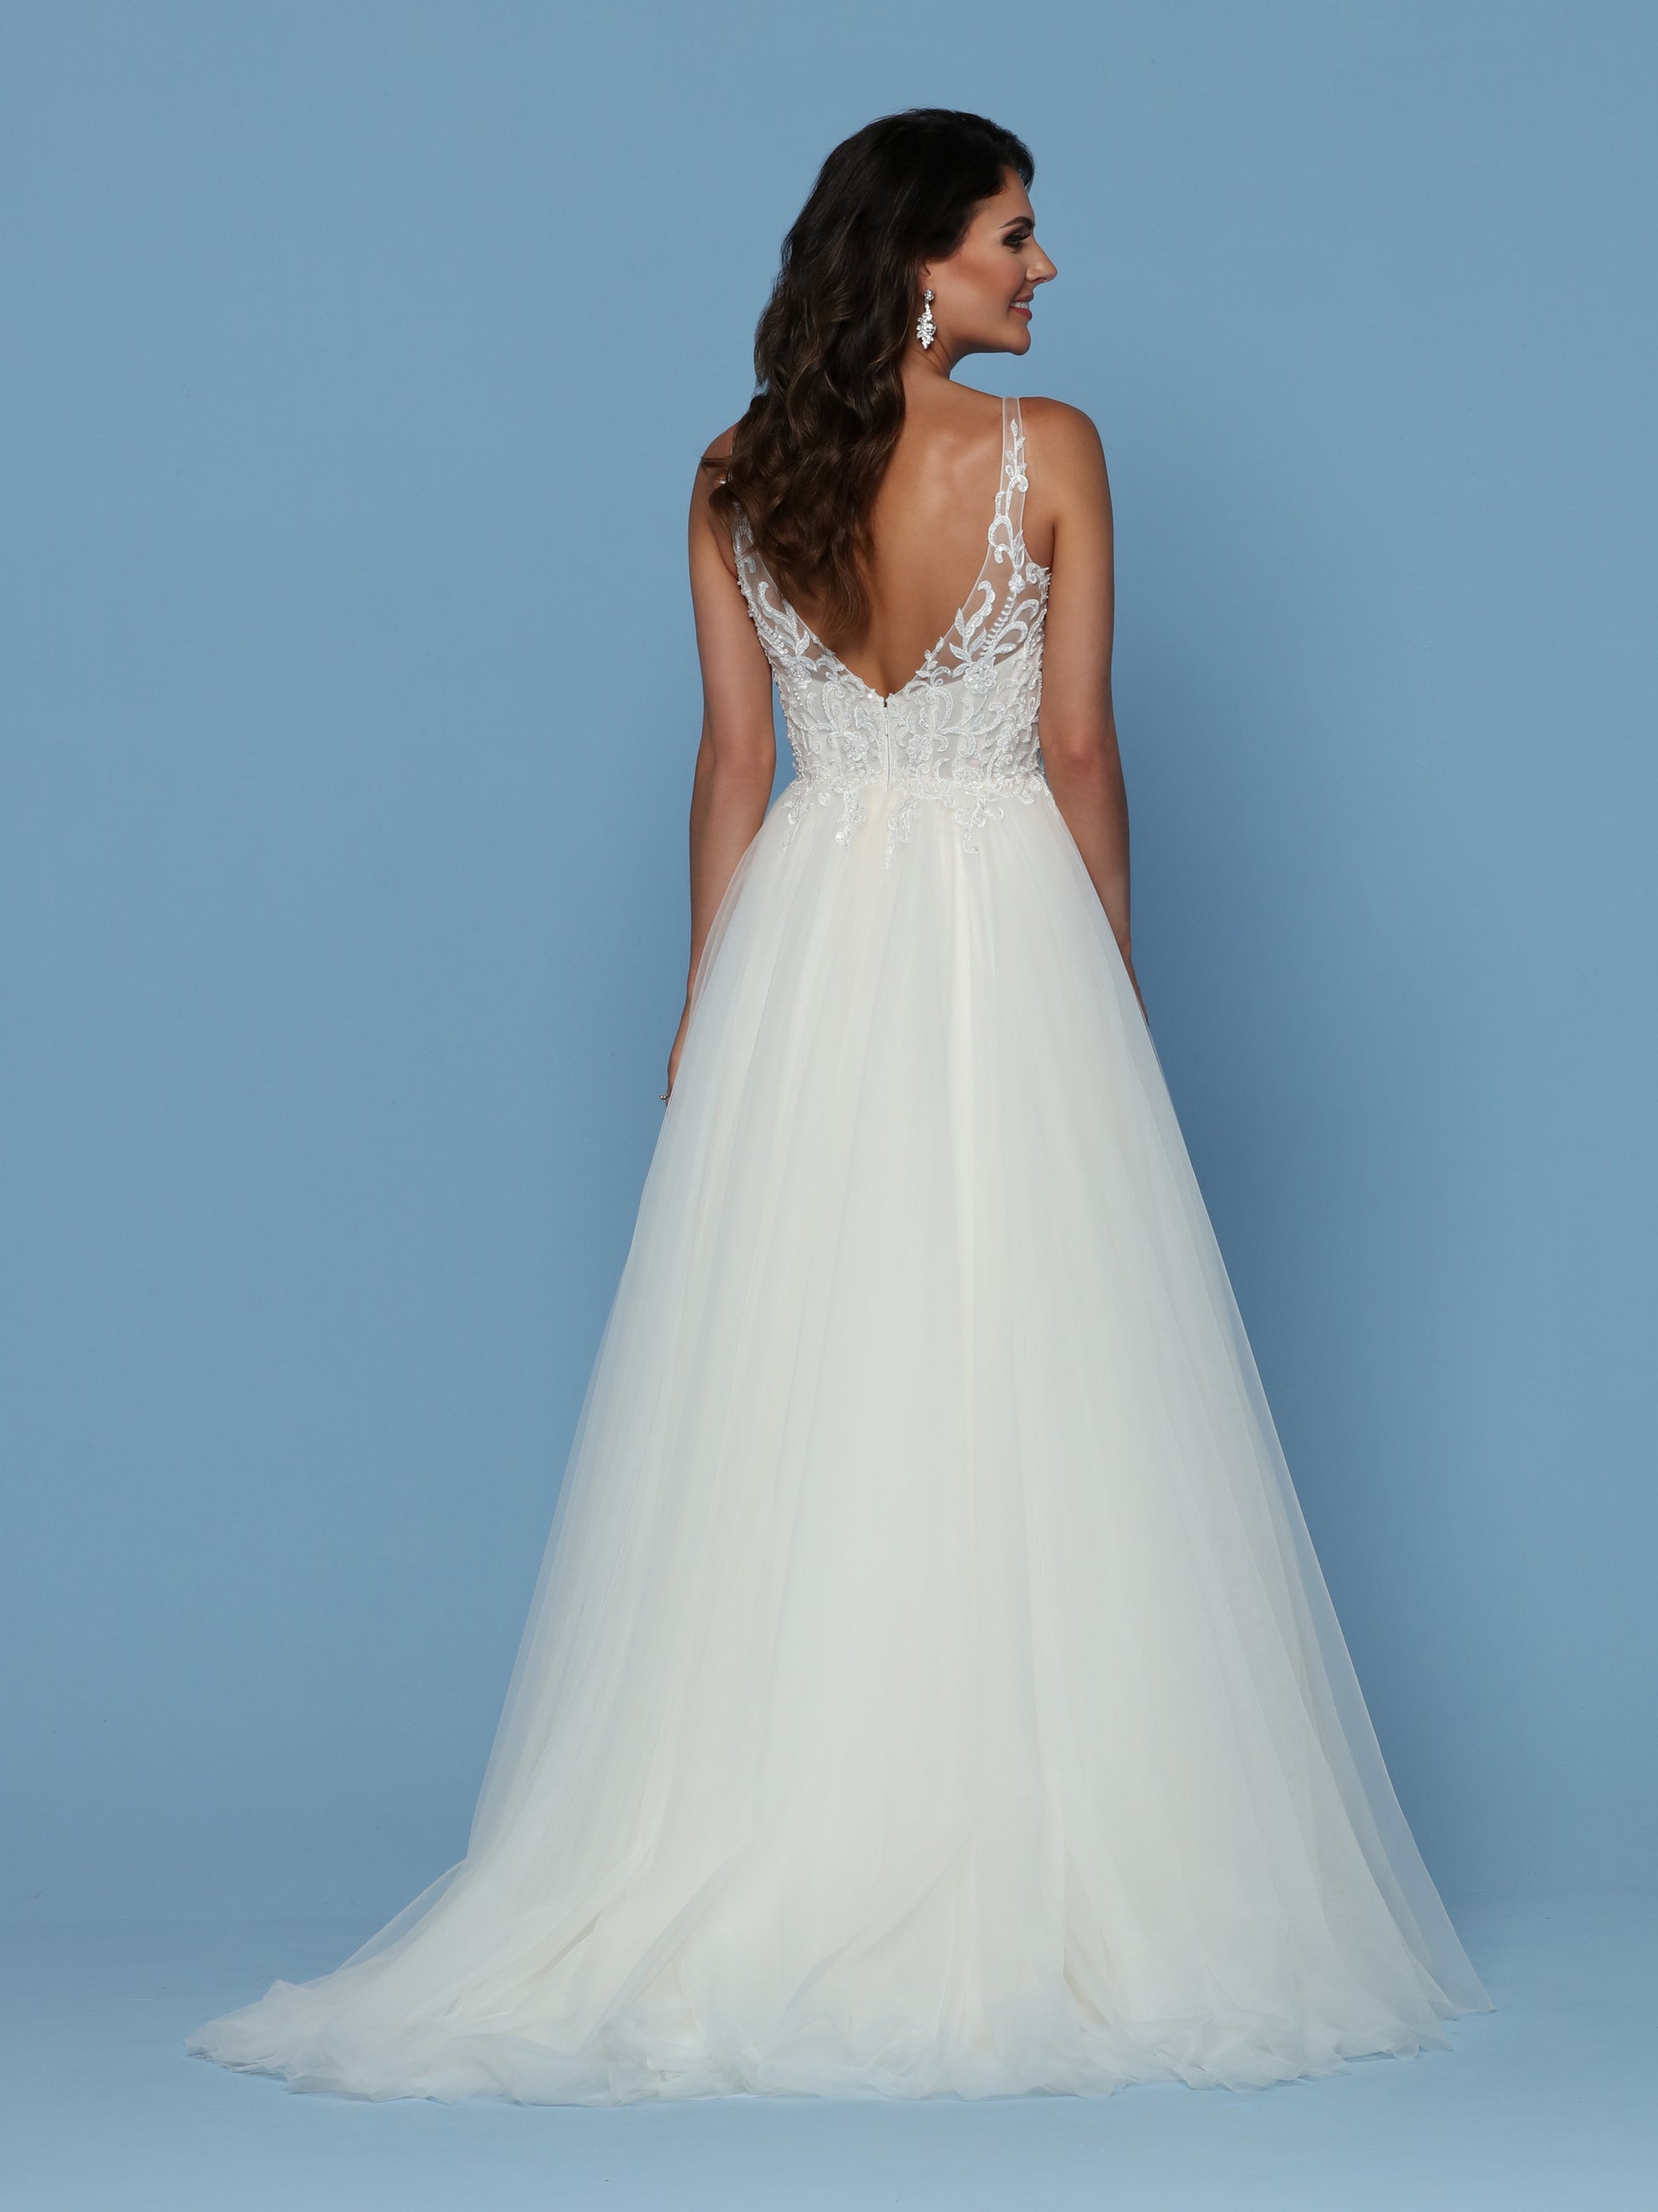 Davinci Bridal 50571 is a Tulle ballgown wedding dress with a sweetheart sheer Illusion V neckline. Embellished lace along the bodice cascading into the full tulle skirt. Sheer Illusion lace Embellished Straps.  Available for 1-2 Week Delivery!!!  Available Sizes: 2,4,6,8,10,12,14,16,18,20  Available Colors: Ivory/Blush, Ivory/Ivory